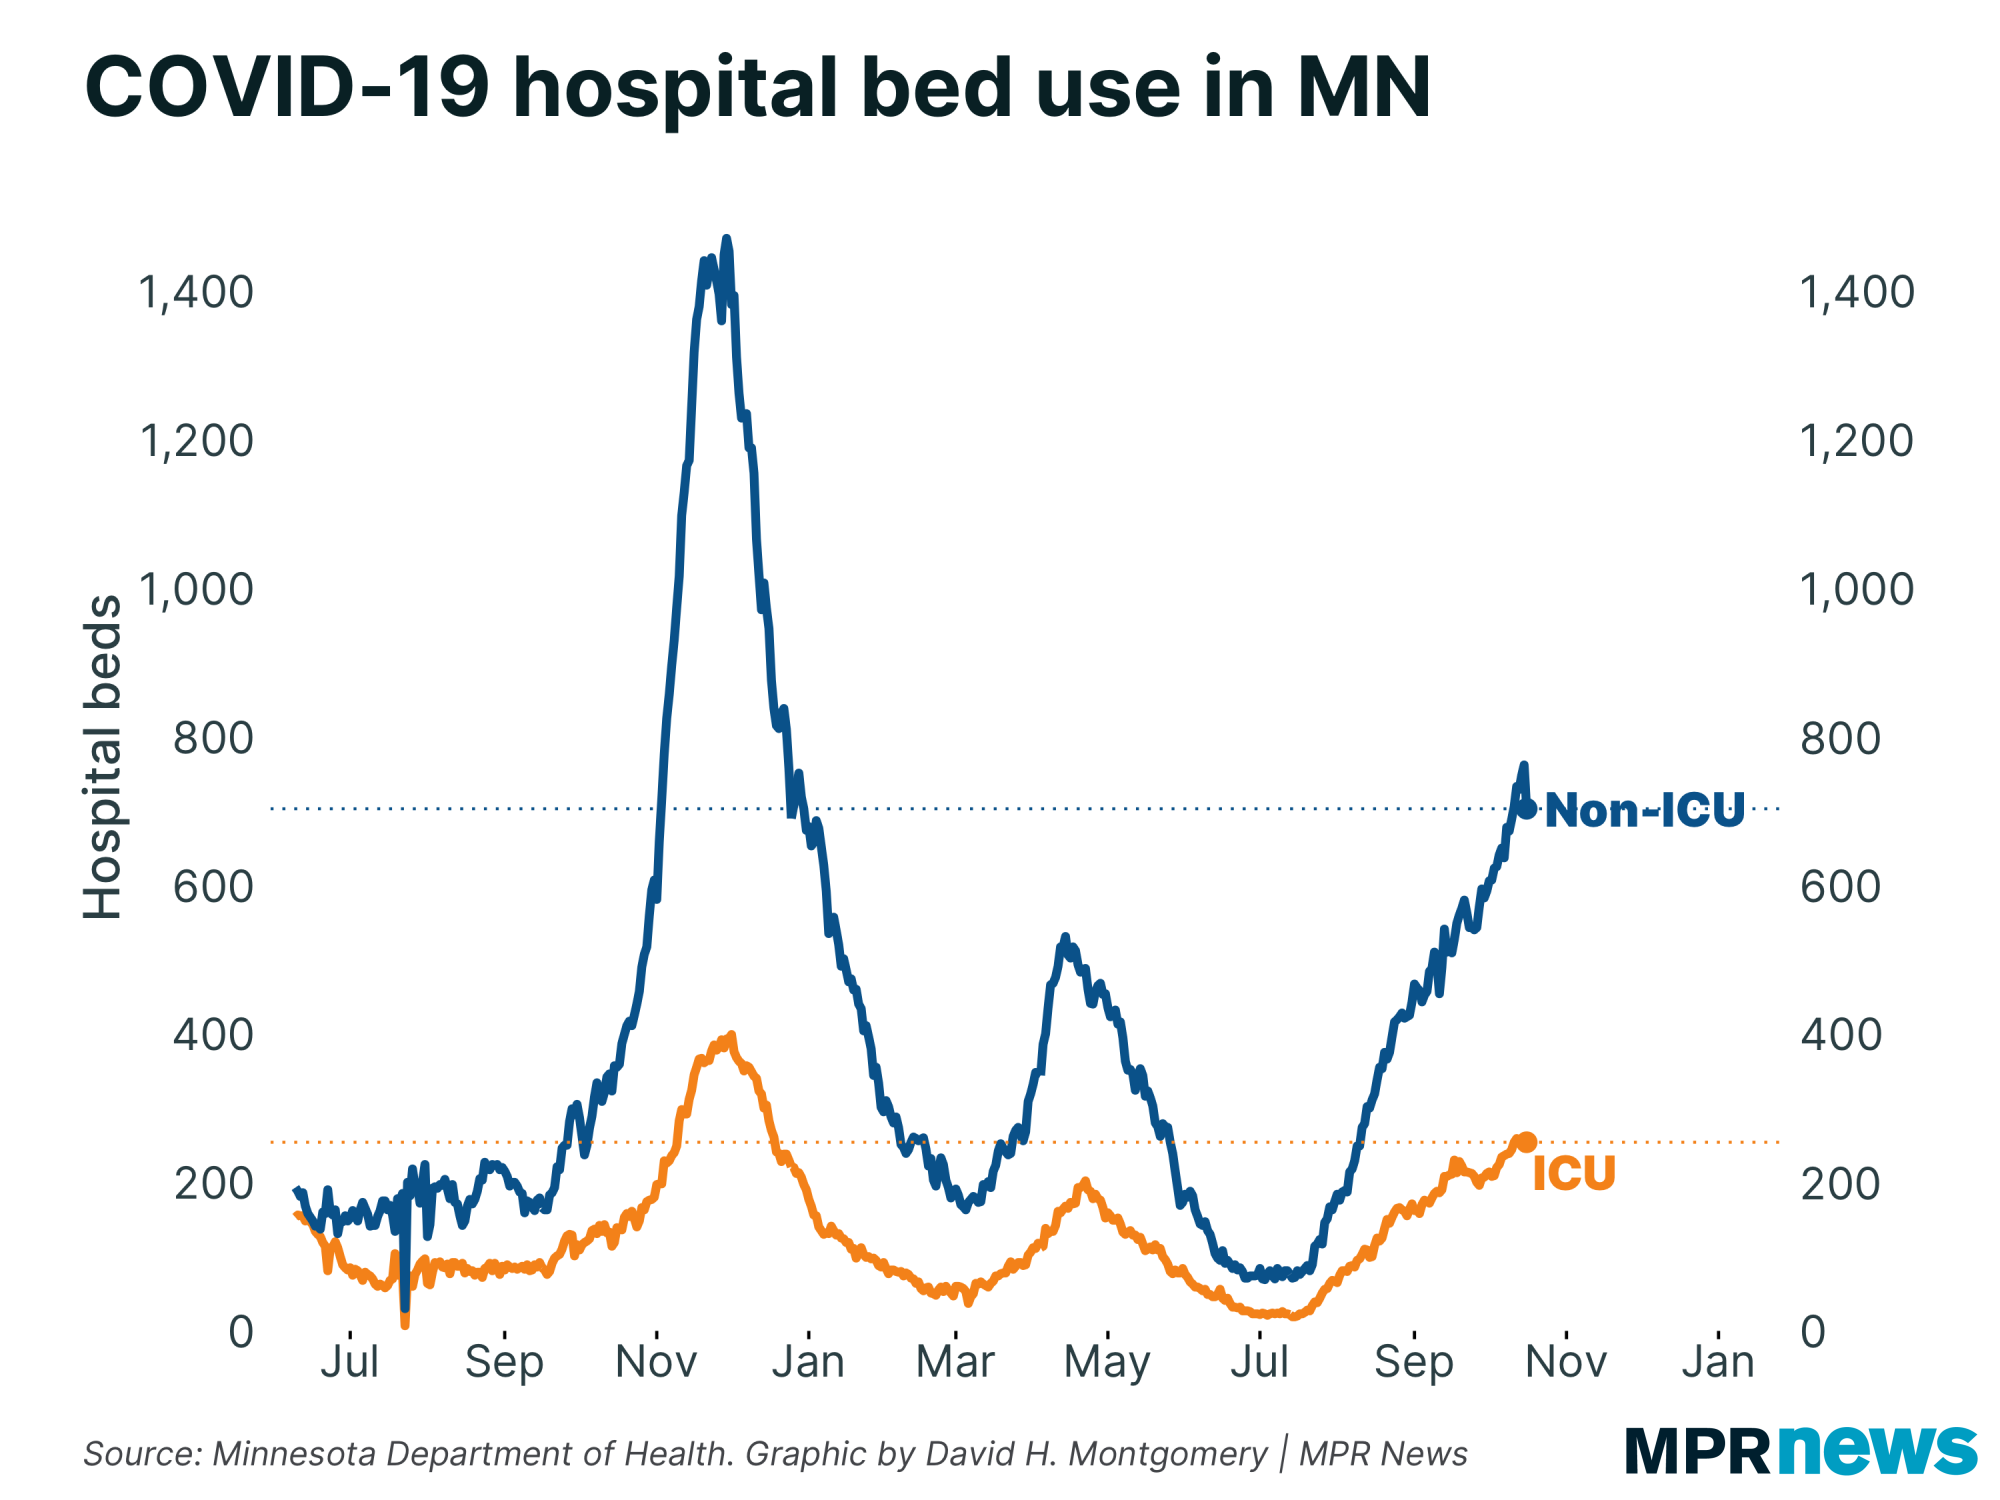 Graph of COVID-19 hospital bed use in Minnesota